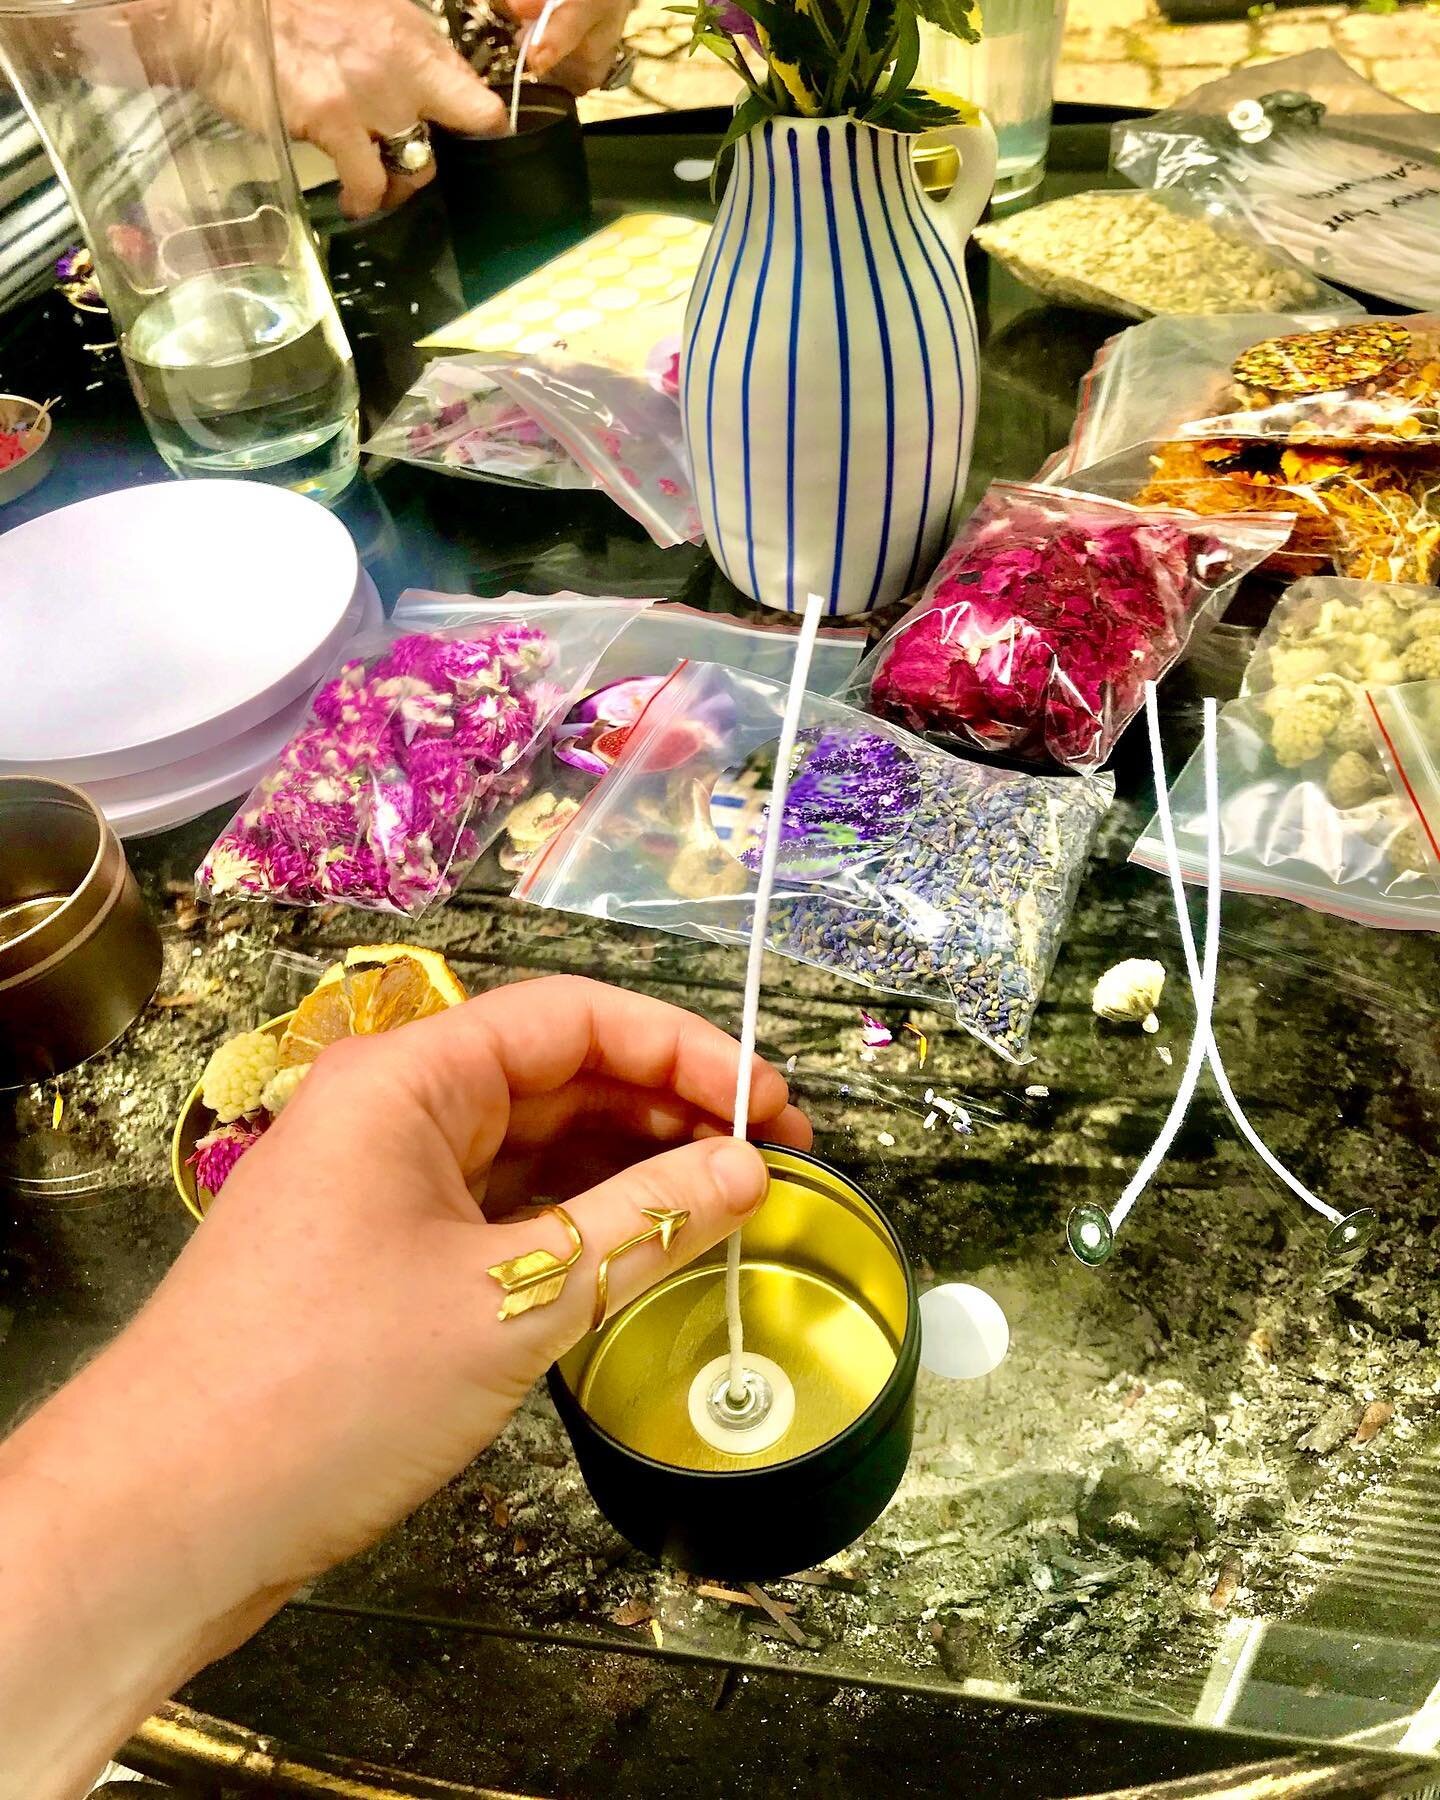 Last June, the SPA x began with my birthday party. This June, I organized a candle-making class for my mother&rsquo;s birthday, led by the incredible @holleighz. Now we are planning something special for Summer 2021! Come join us&hellip;